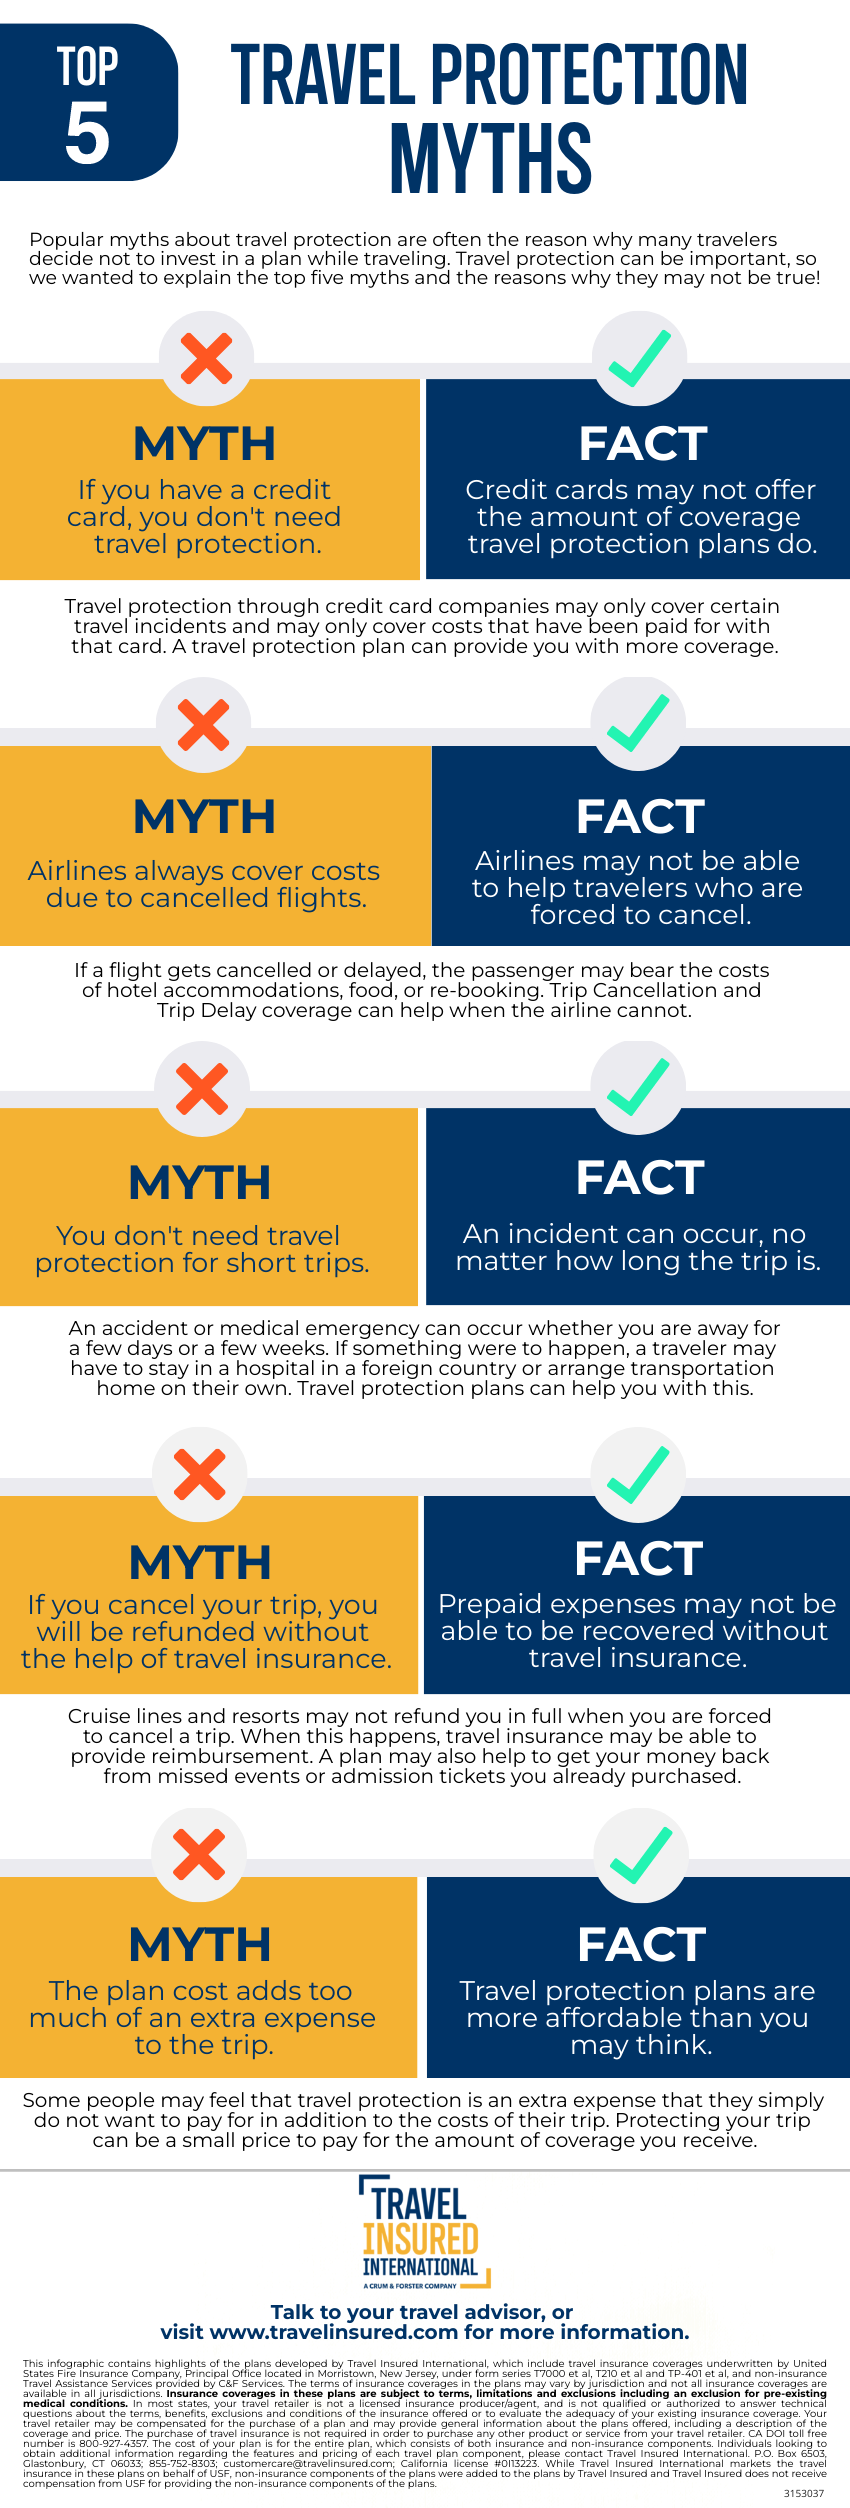 Travel Protection Myths